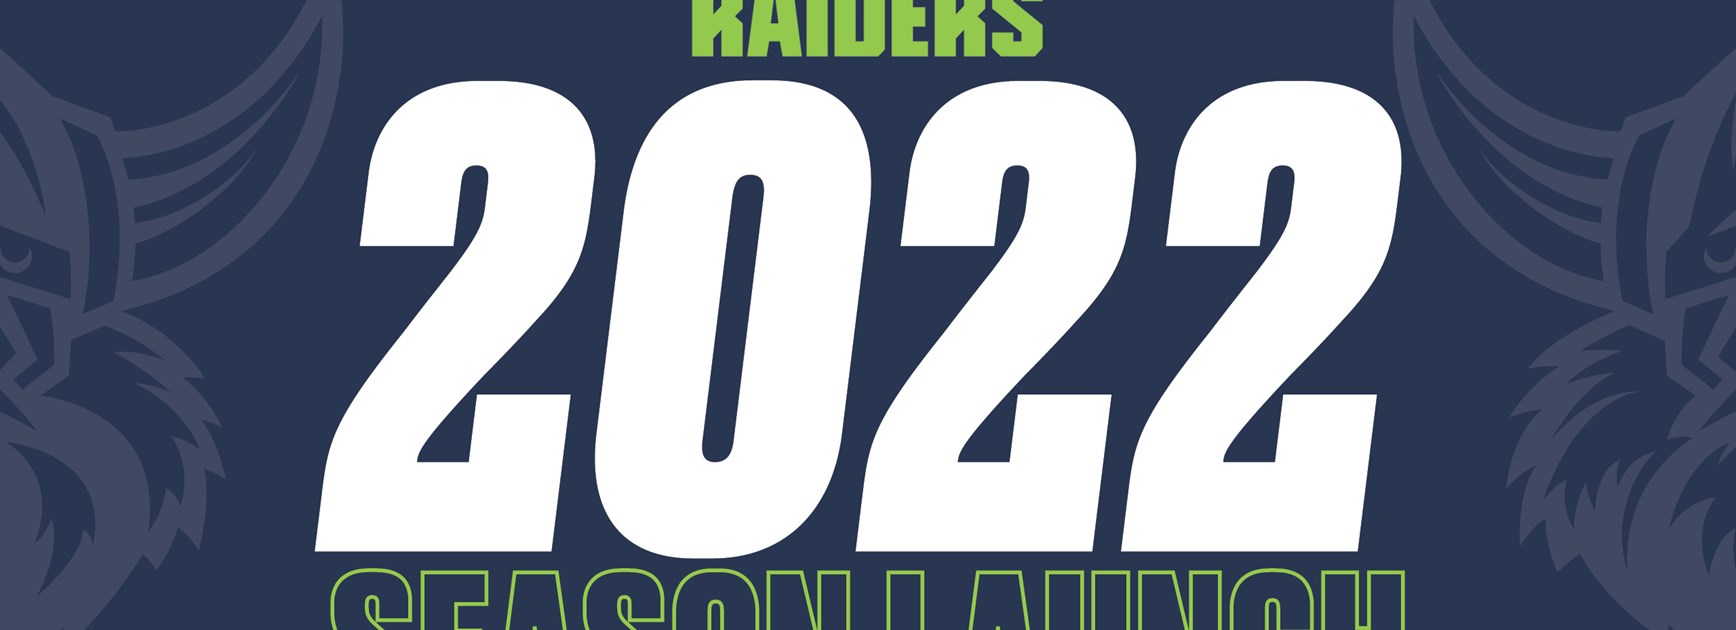 Raiders to launch season 2022 with Online TV Special